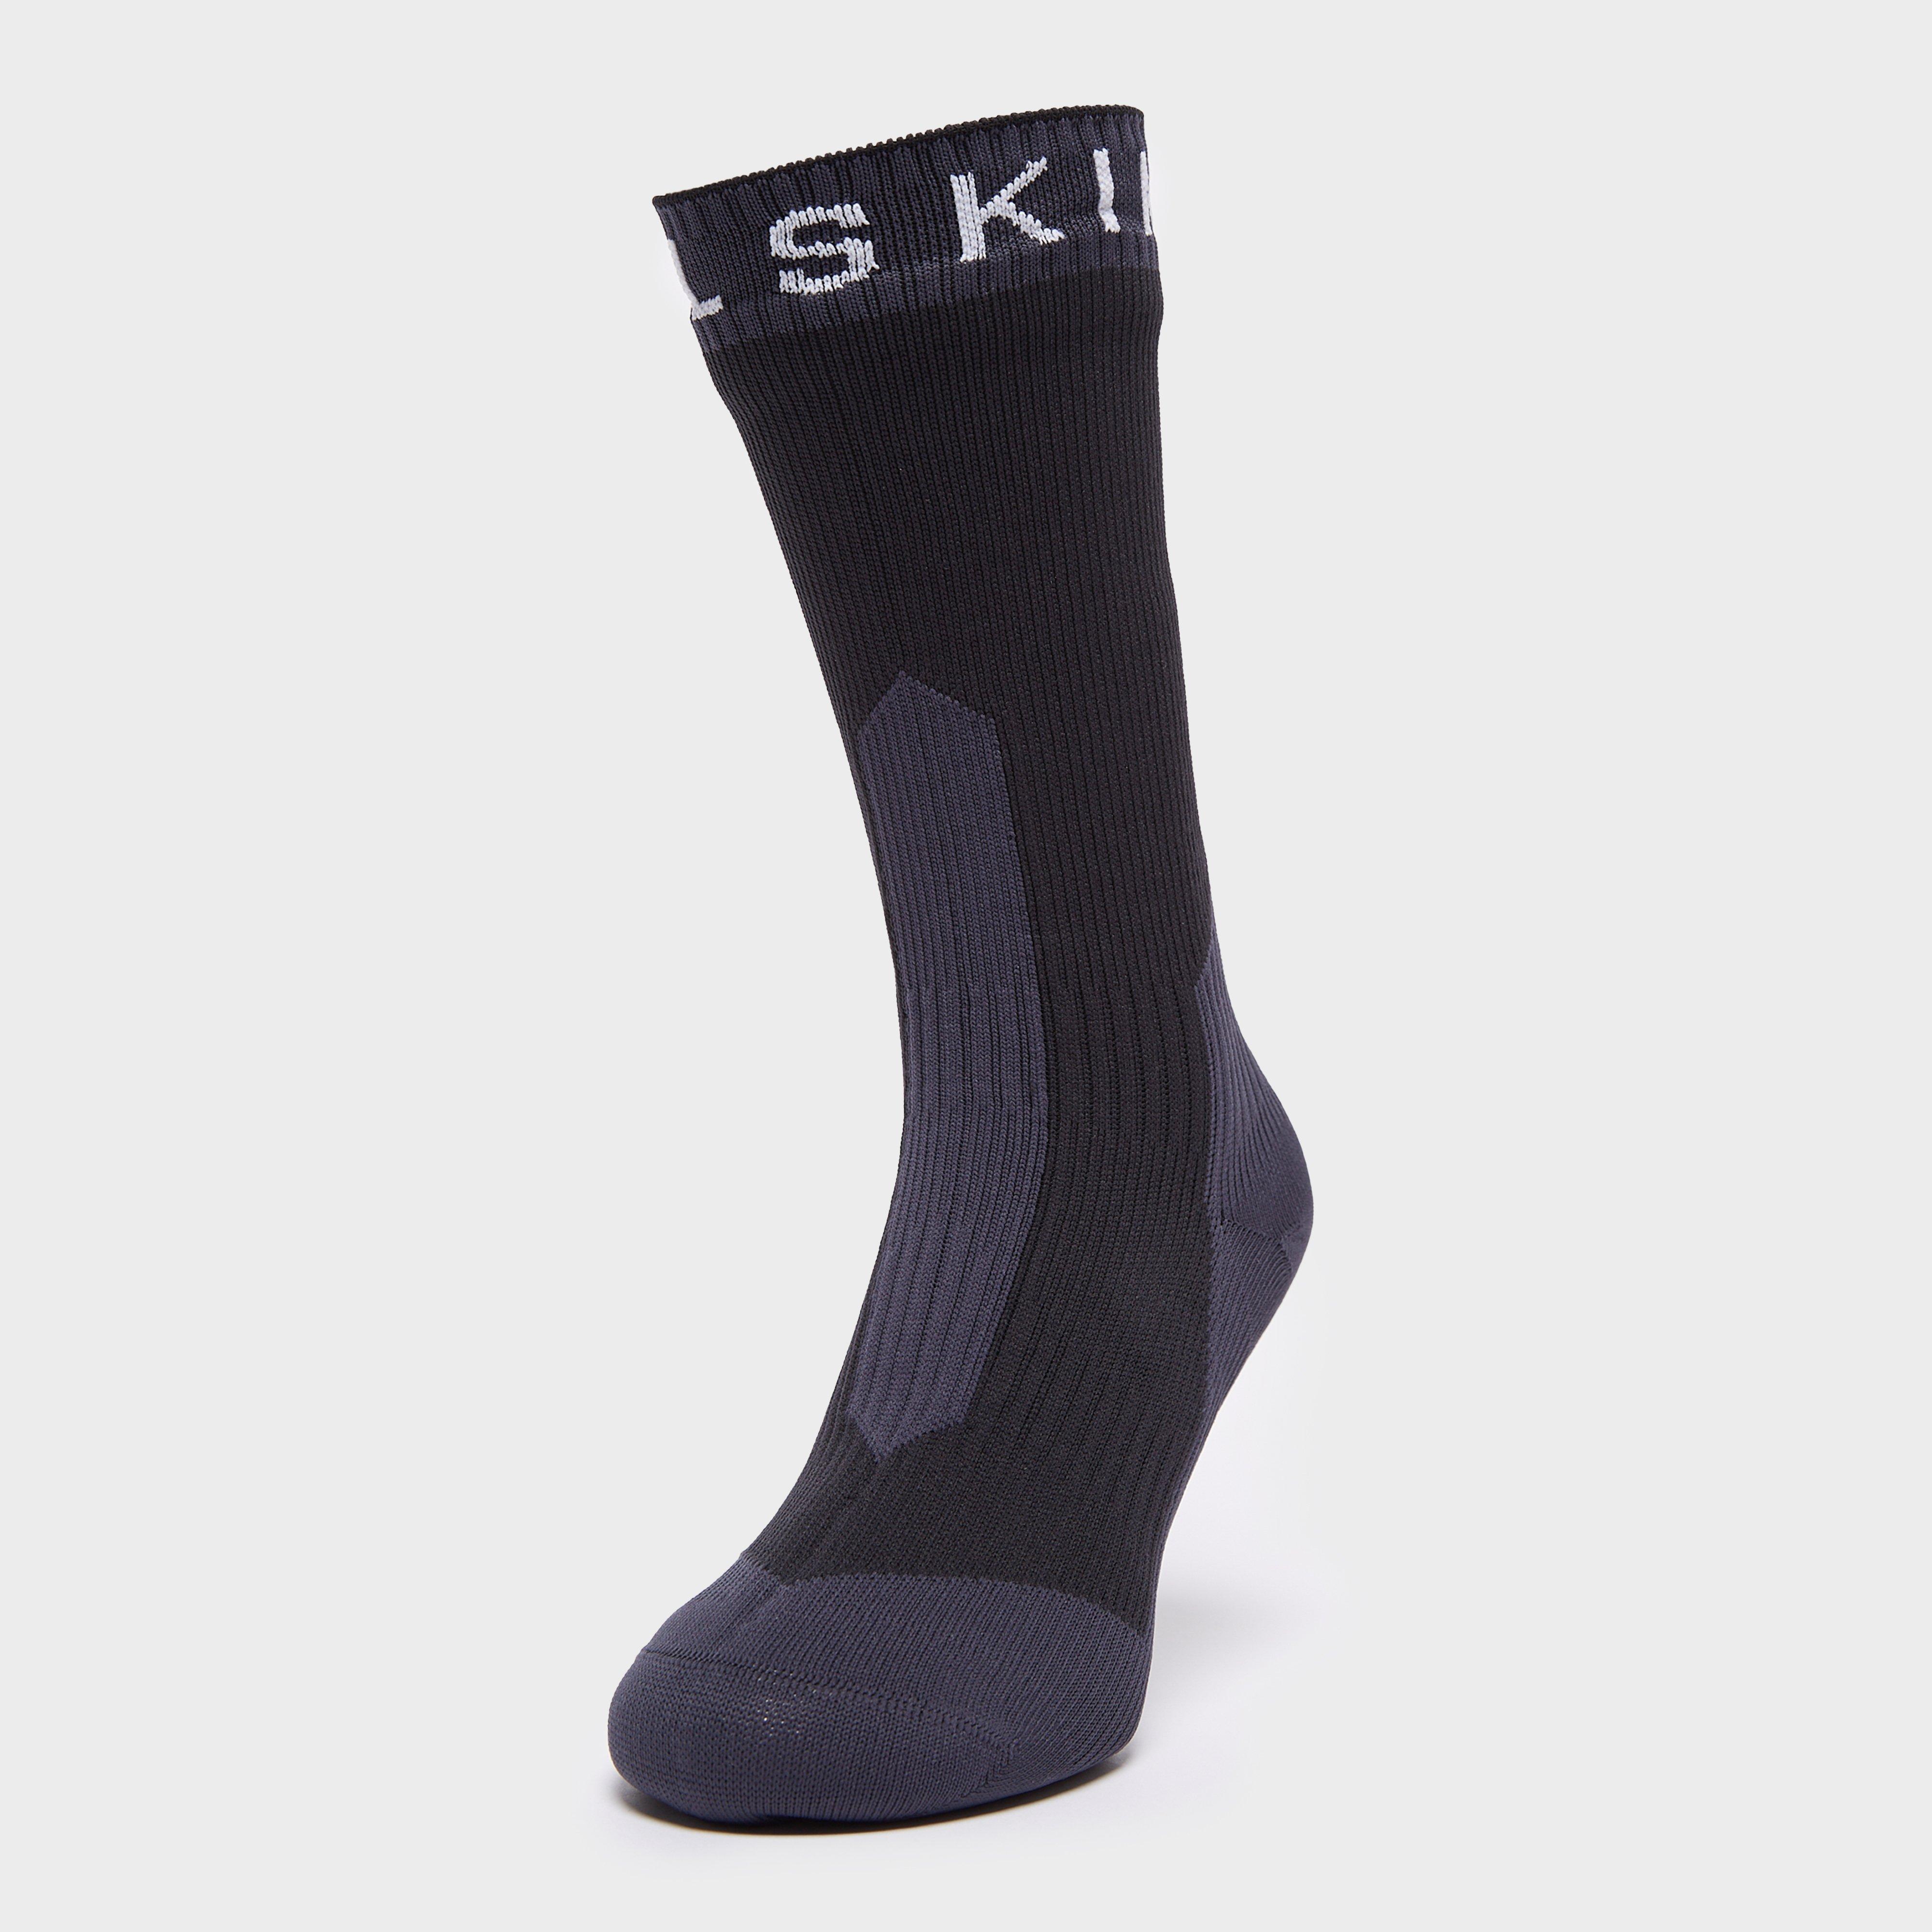  Sealskinz Extreme Cold Weather Waterproof Mid Length Sock, Black